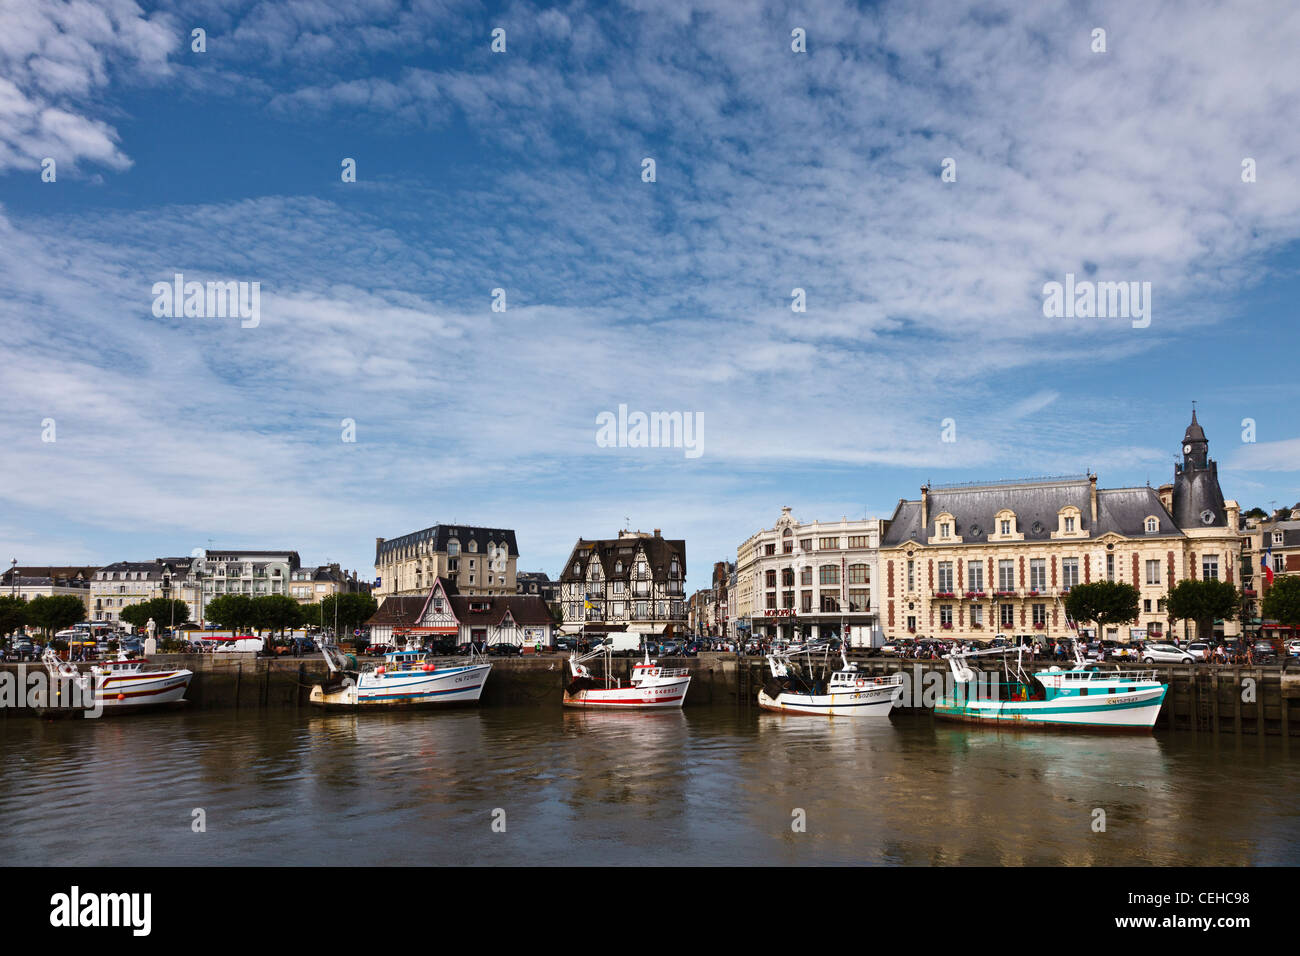 Fishing boats moored on the River Touques at Trouville sur Mer, Normandy, France Stock Photo